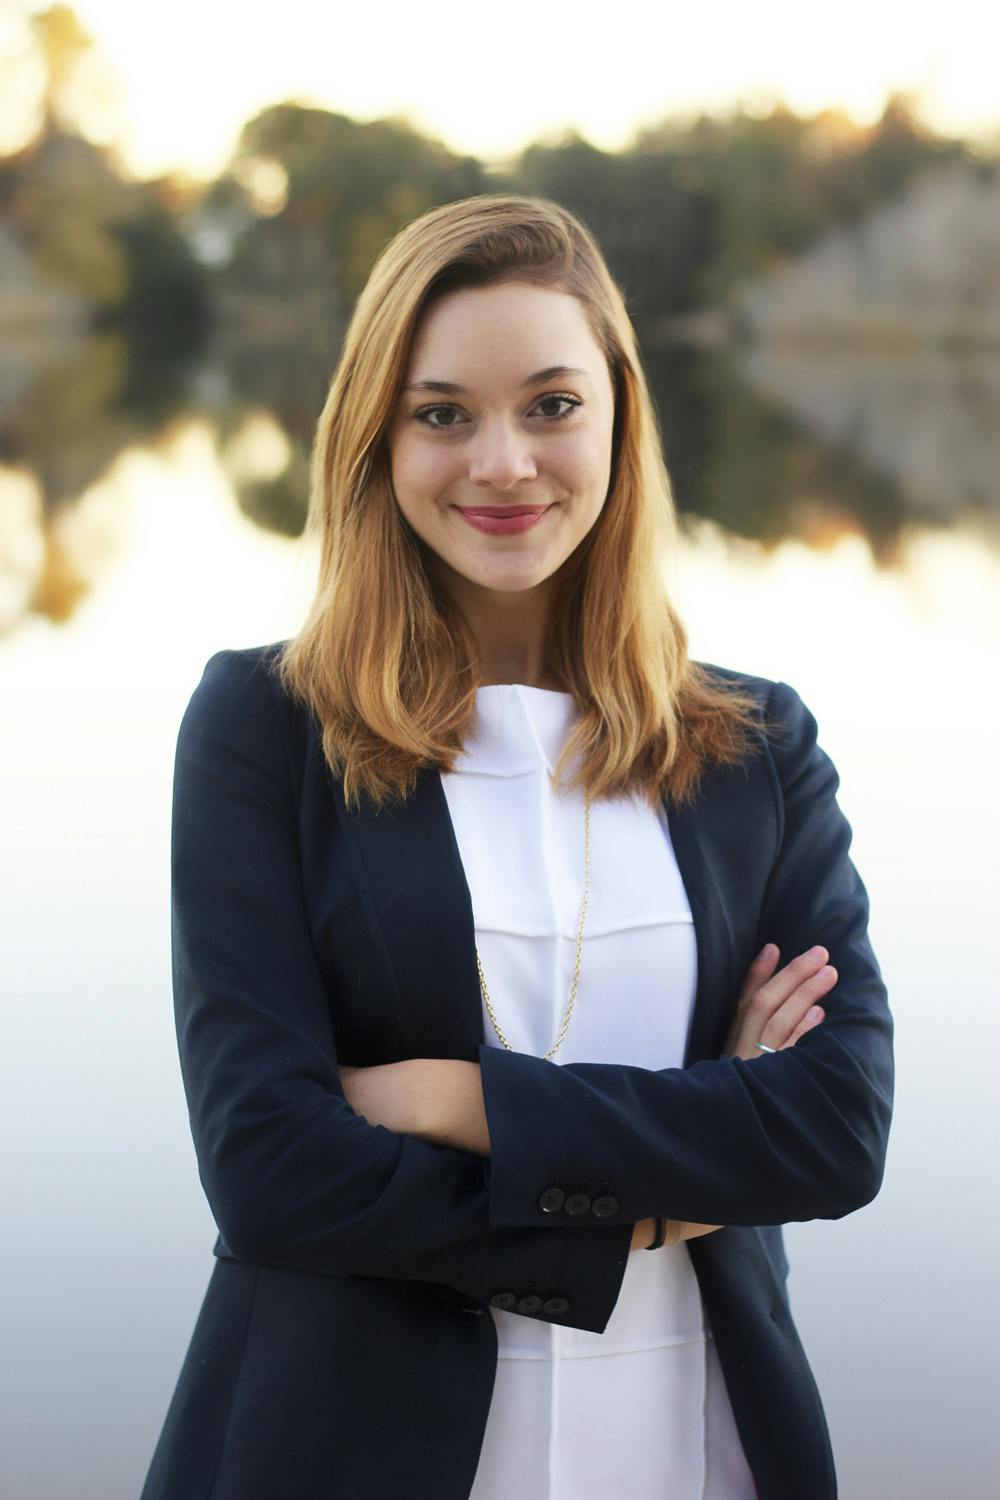 <p>Lillian Rozsa is a 20-year-old UF political science and women’s studies sophomore running for Student Body treasurer with Access Party.</p><p>Rozsa currently serves as a senator for District D. She serves as the current vice president of the Women’s Student Association and is the president and founder of the UF chapter of HeForShe. Rozsa has also served on the Transportation and Fee Committee.</p><p>She said she wants to remain accessible to students trying to start student organizations.</p><p>“I really understand what it takes to be part of a student organization and to really start from the bottom up in terms of financials with student organizations,” she said. “I really think that I’m someone that students can go to if they have fee complaints or go to for any sort of question they may have.”</p>